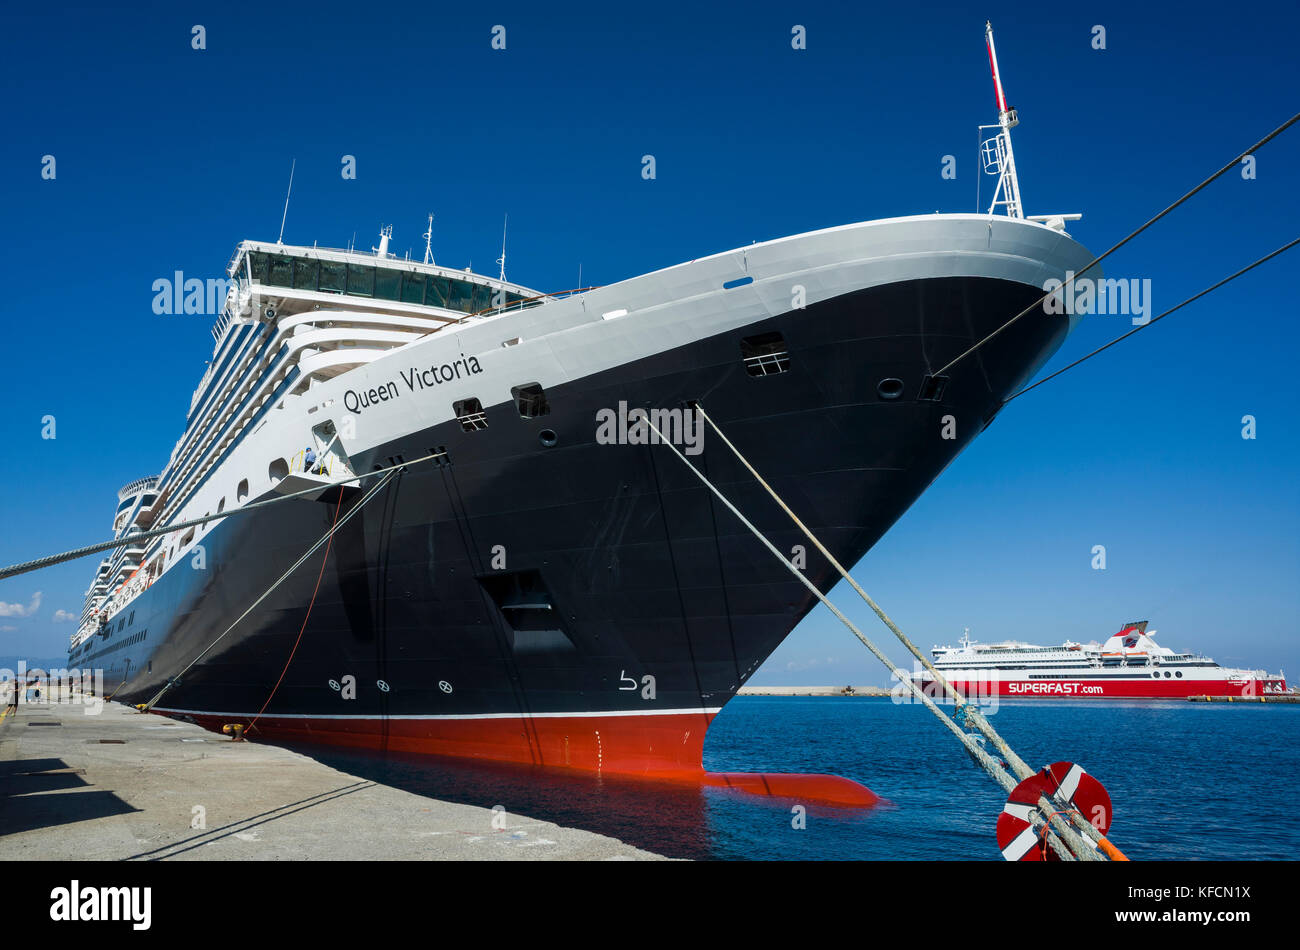 Rhodes Tourist Harbour, Rhodes. Crete.  Greece.  Cunard's luxury cruise liner, Queen Victoria, moored on the quayside.  It's a sunny day with a pure blue sky reflecting in the ocean. Stock Photo